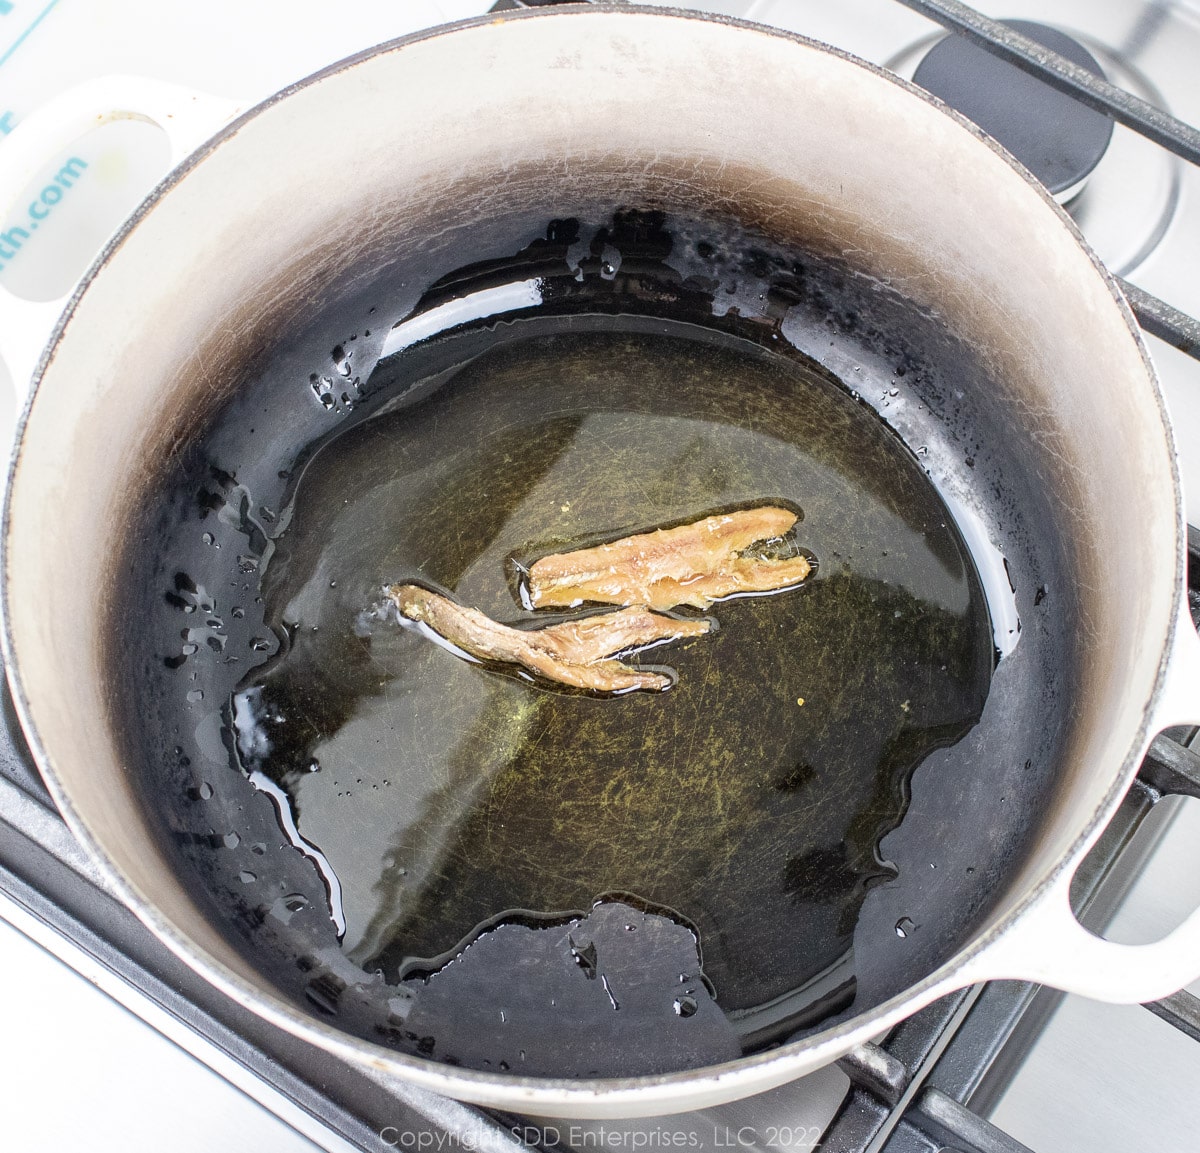 Anchovy fillets in olive oil in a Dutch oven